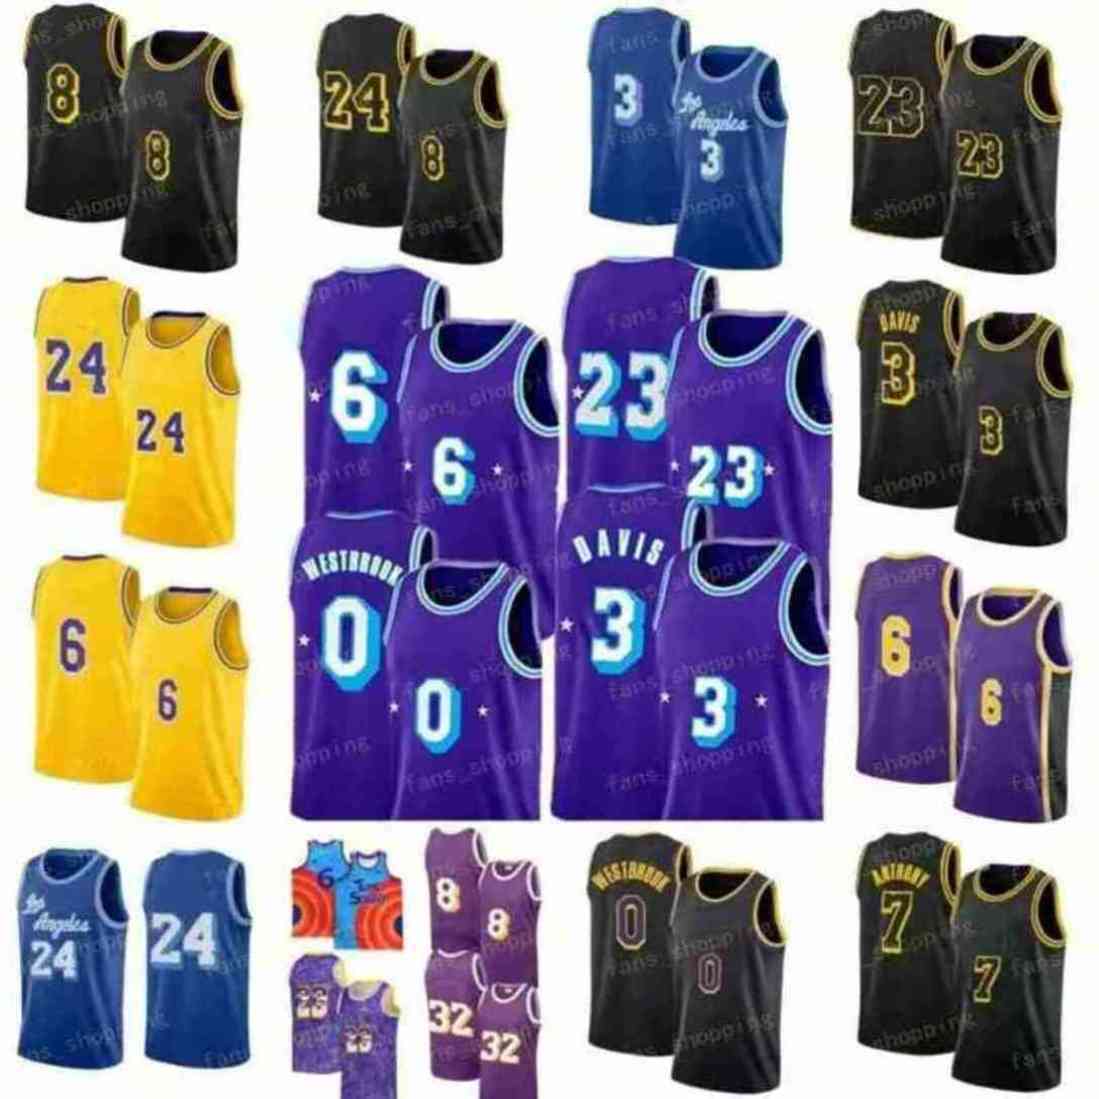 

Los 23 6 Angeles 24 8 Carmelo 7 Anthony Basketball Jersey Space Jam 2 Tune Squad Russell 0 Westbrook Davis Mamba LeBron Mens Youth Kids Jerseys Black 75th anniversary, As